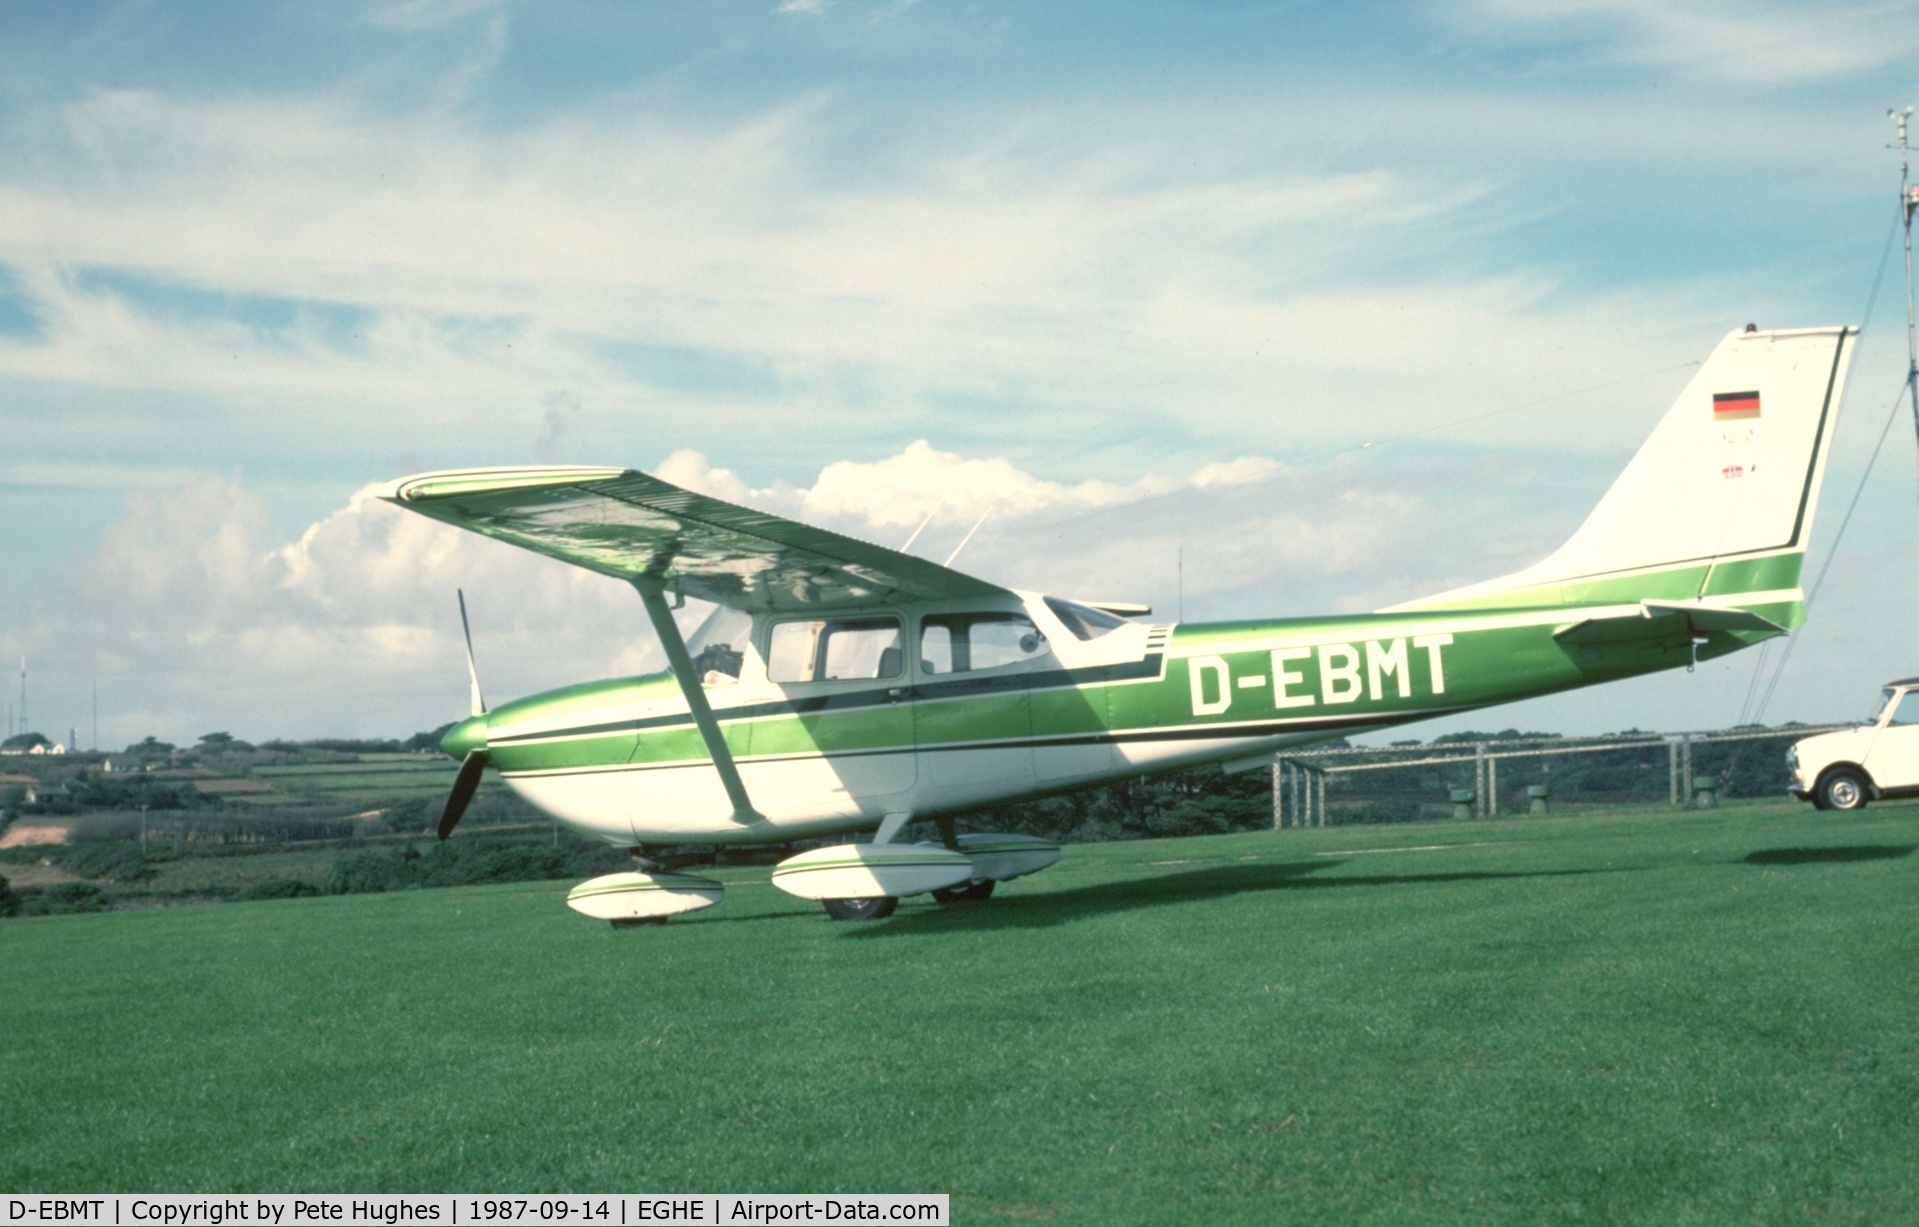 D-EBMT, 1969 Reims FR172F Reims Rocket C/N 0112, D-EBMT FR172F St Mary's Isles of Scilly